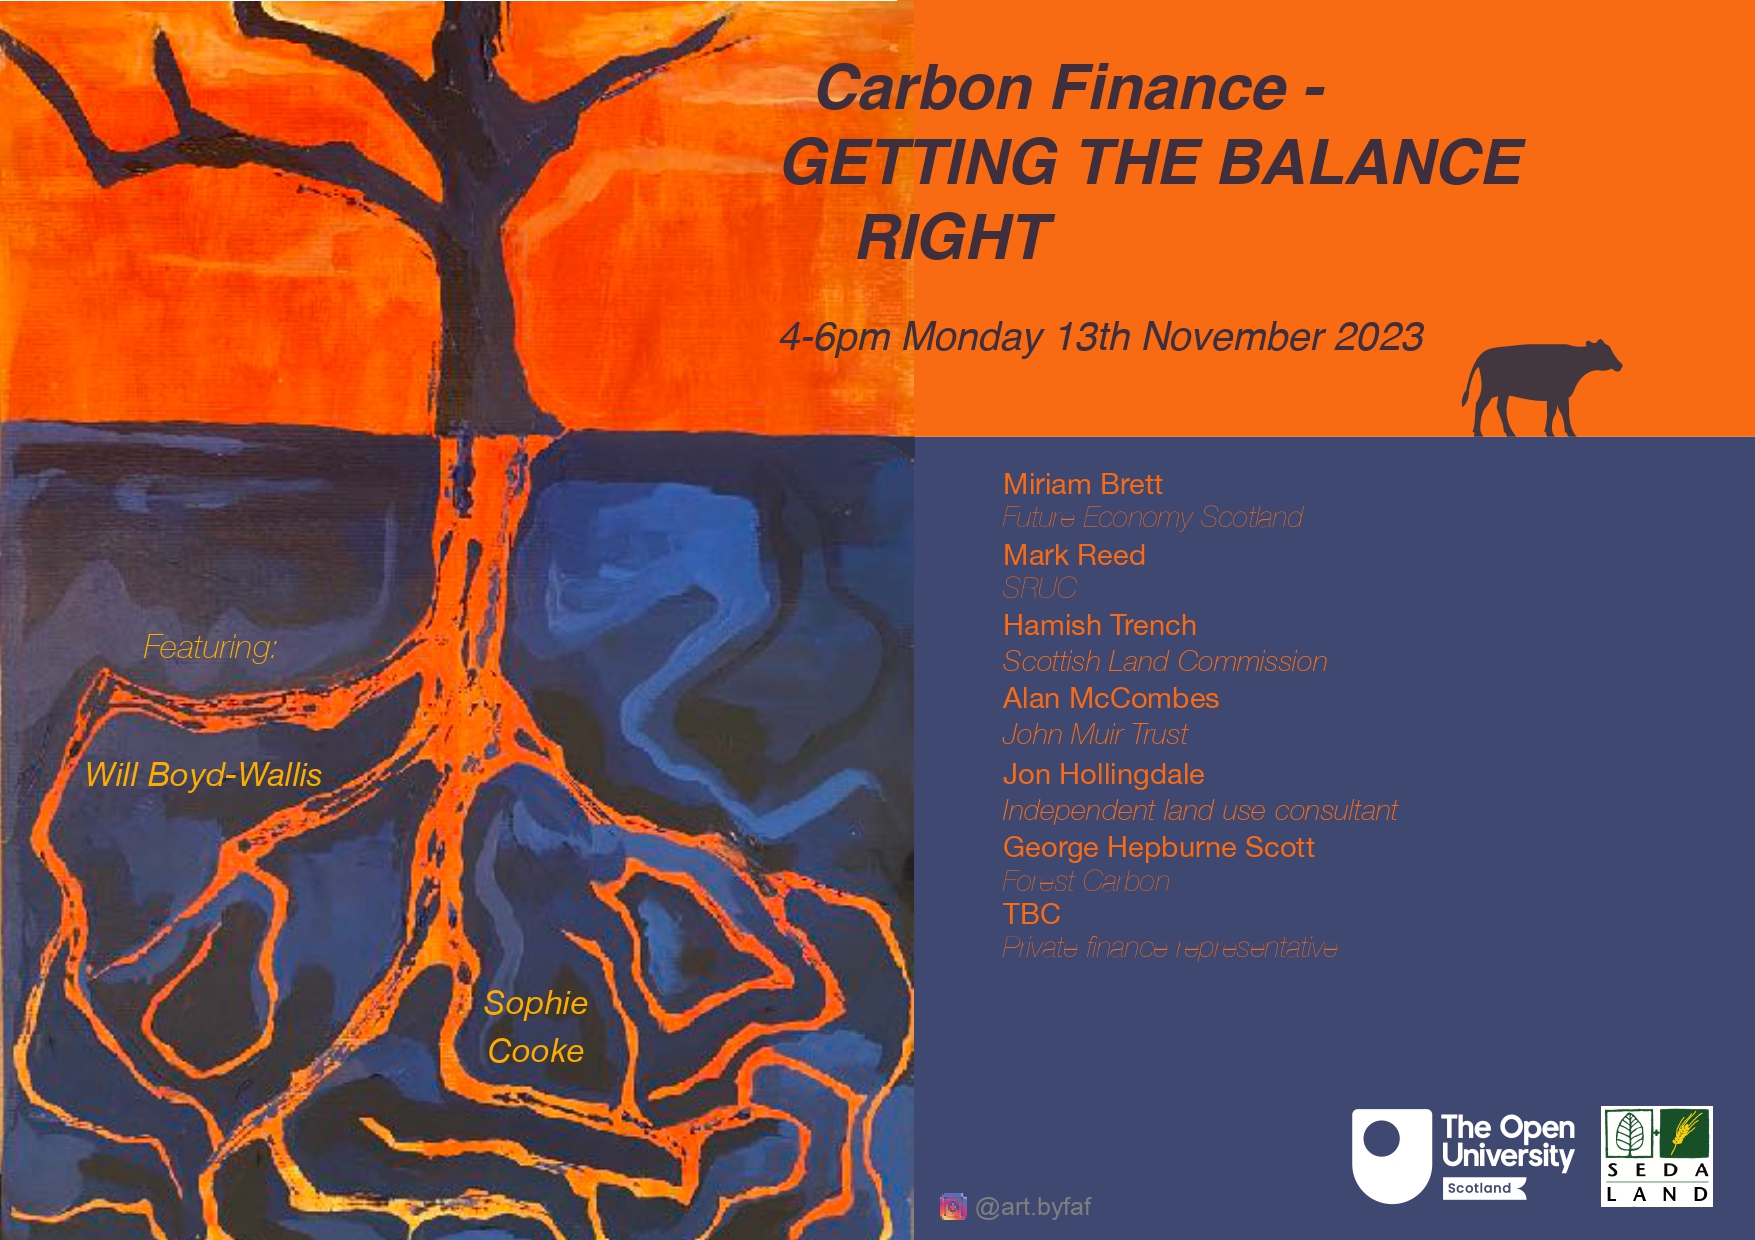 SEDA Land Carbon Finance 2: Getting the Balance Right event poster